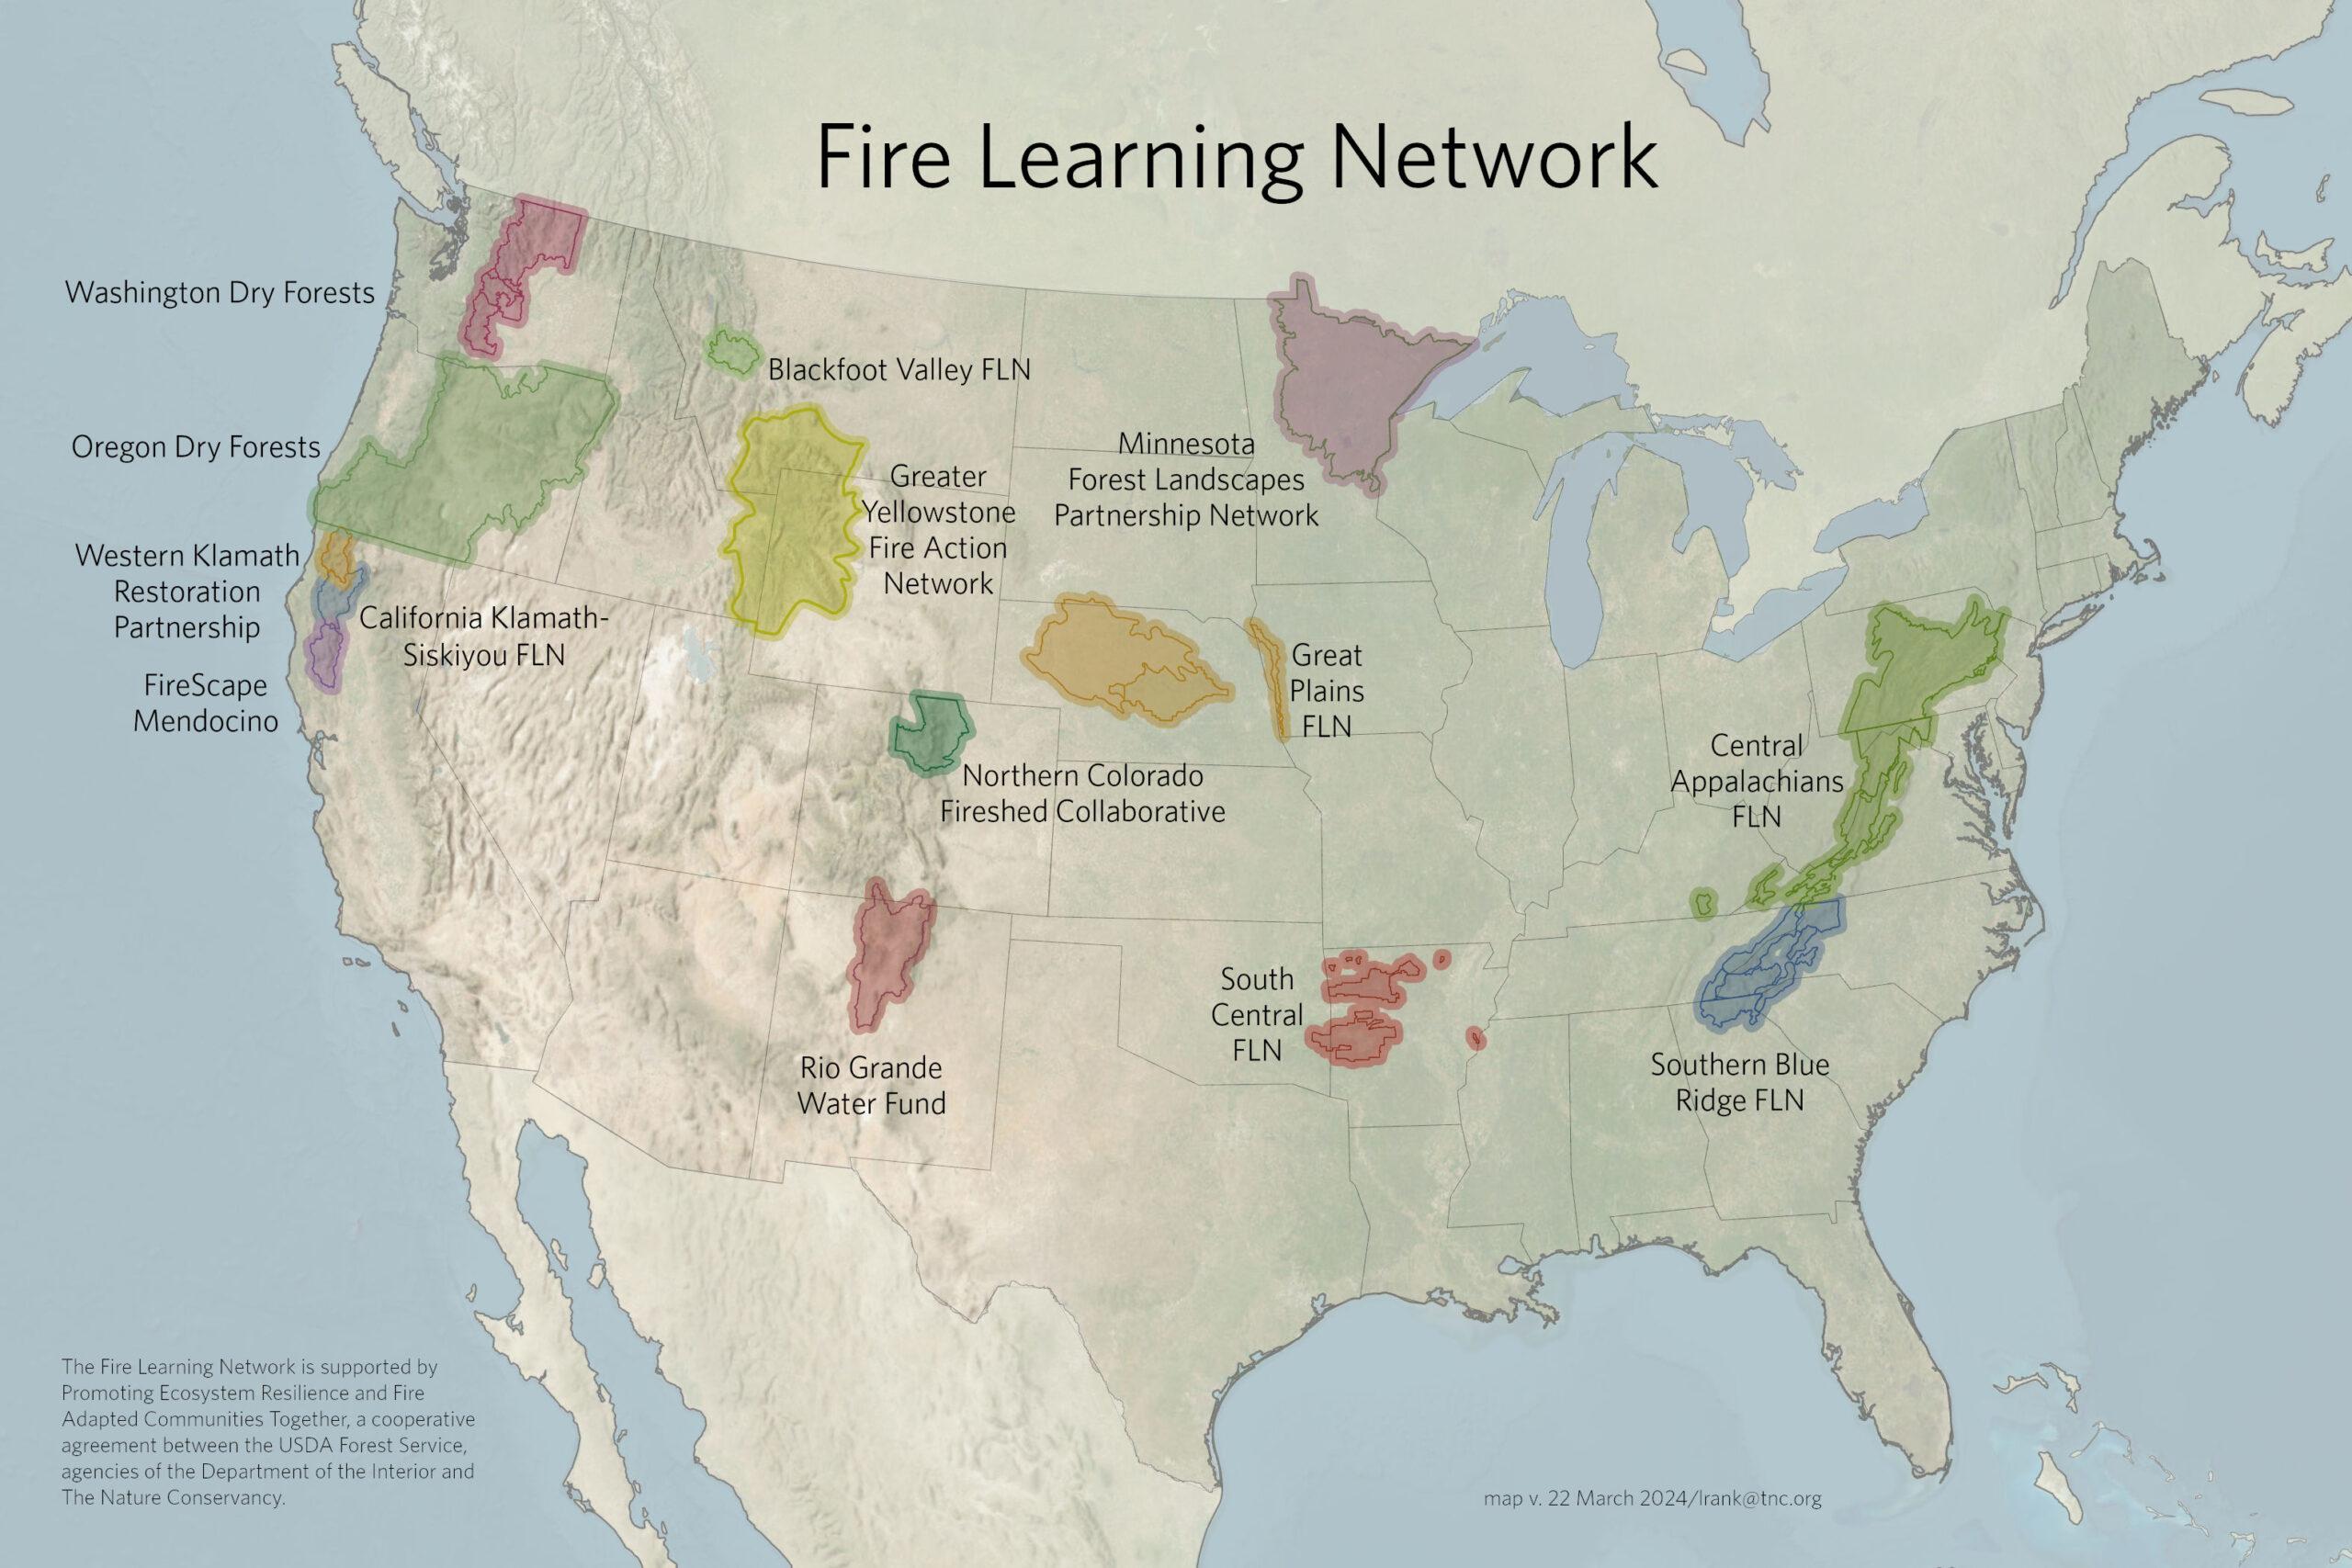 Map showing Fire Learning Network locations across the United States